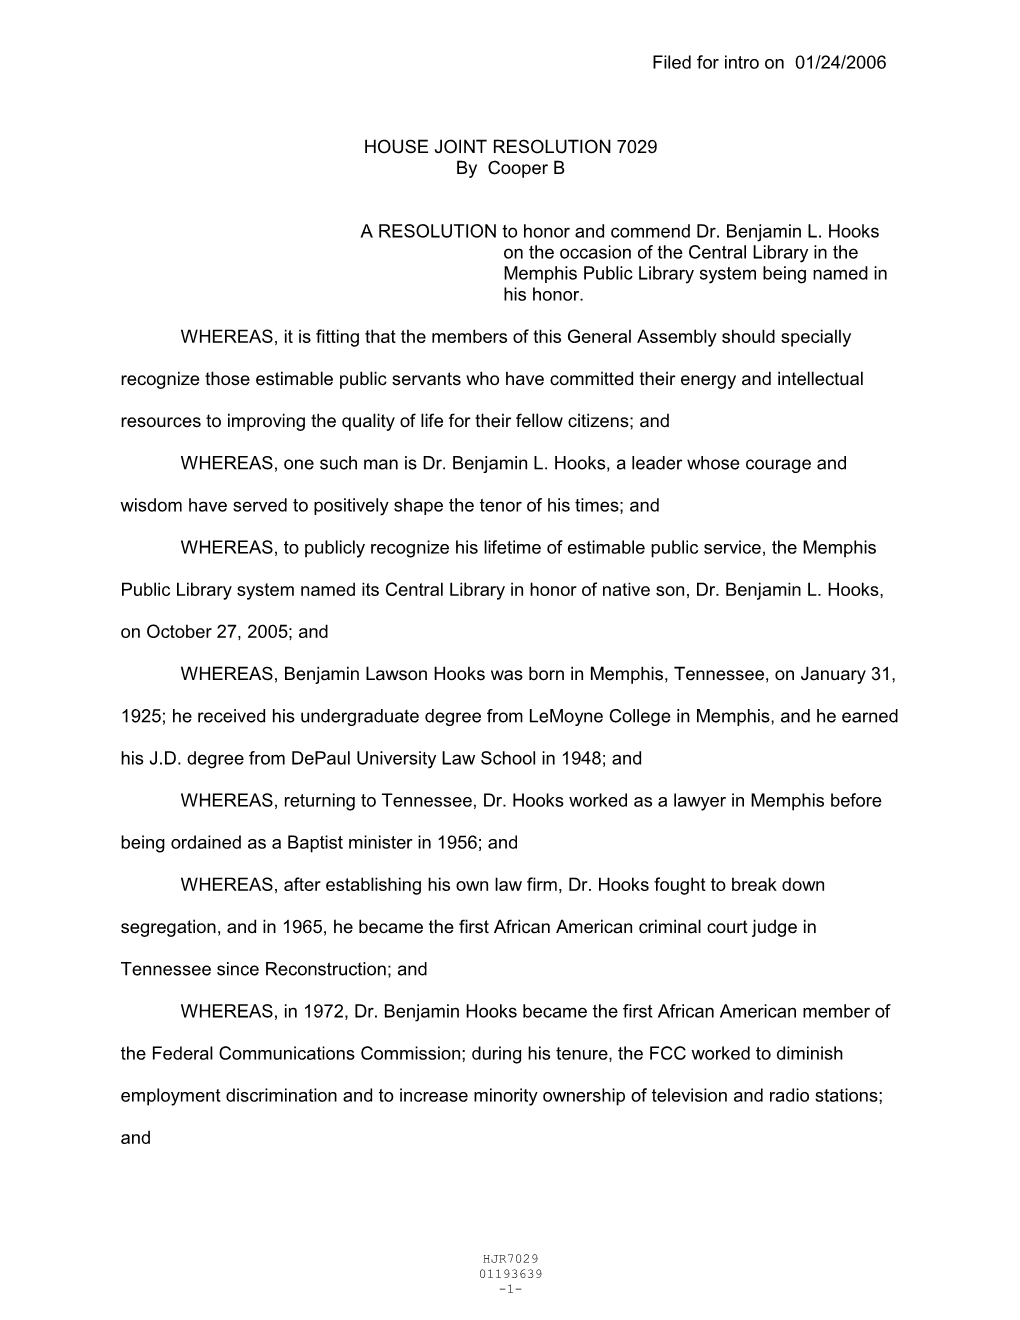 Filed for Intro on 01/24/2006 HOUSE JOINT RESOLUTION 7029 By